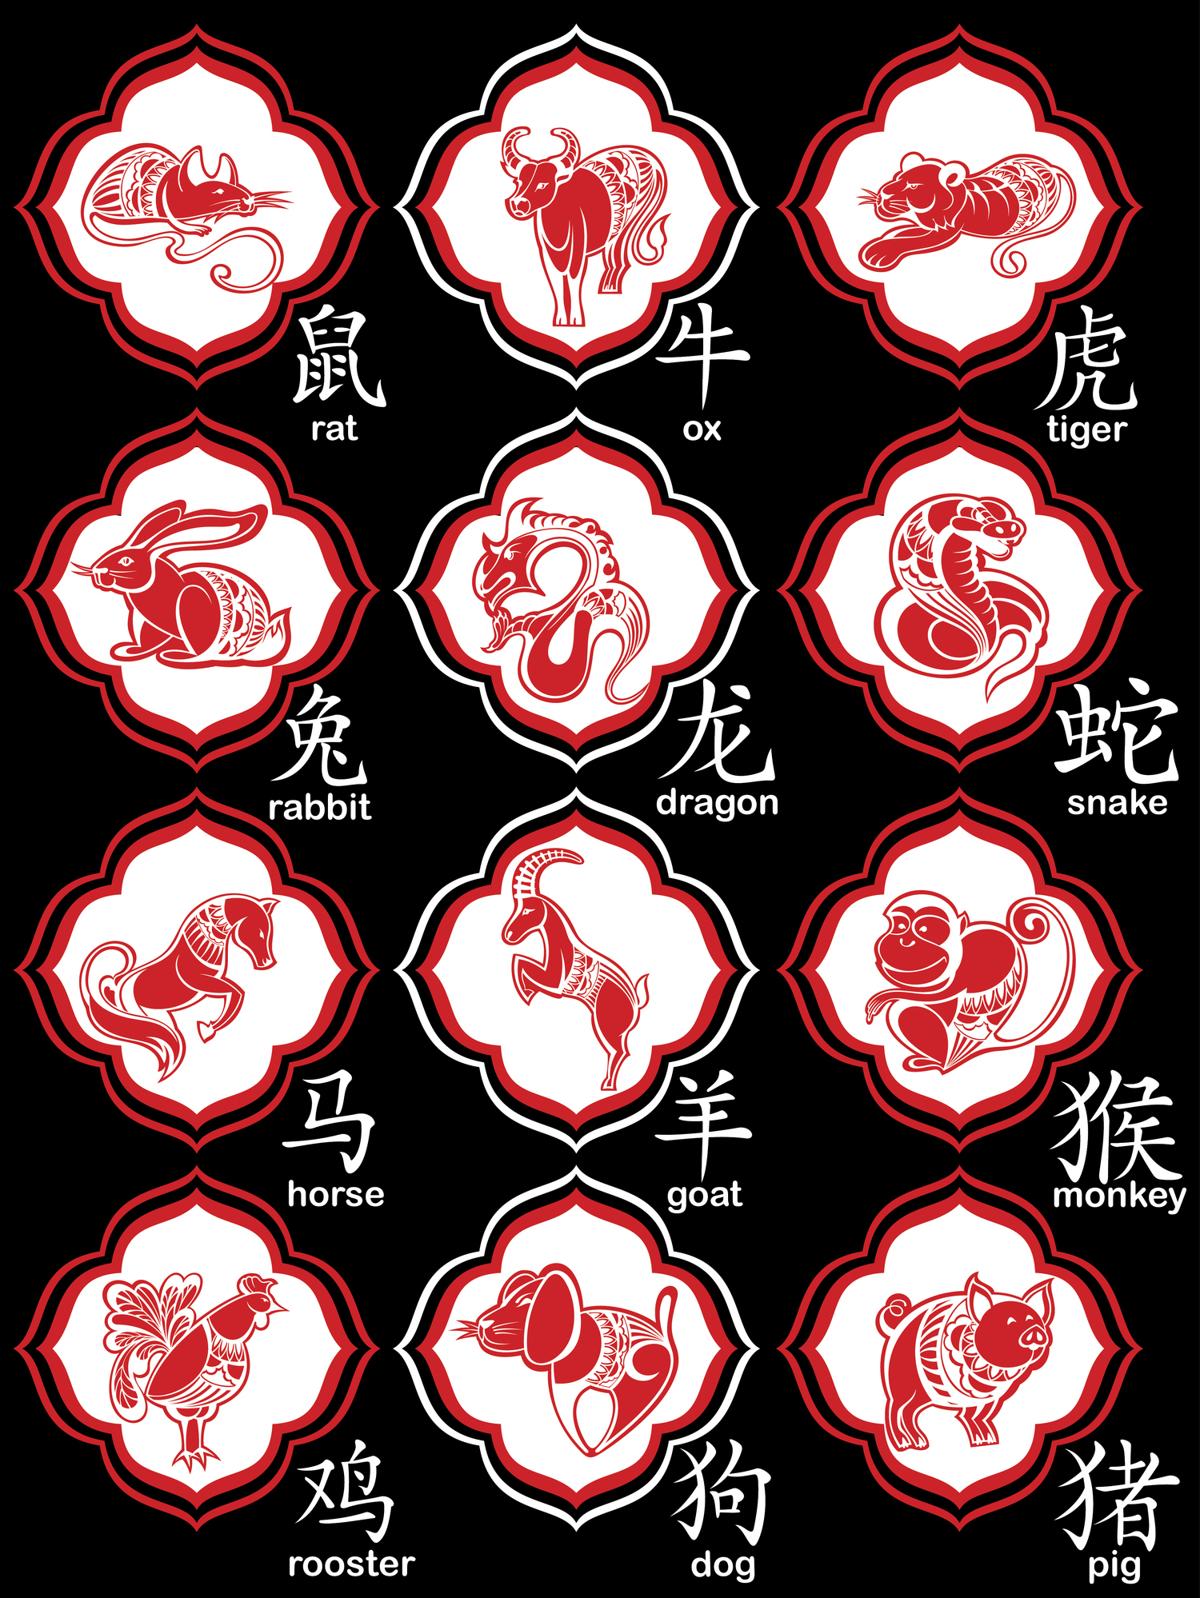 Chinese Horoscope  Astrology 12 Animal Zodiac Signs Meanings And Characteristics